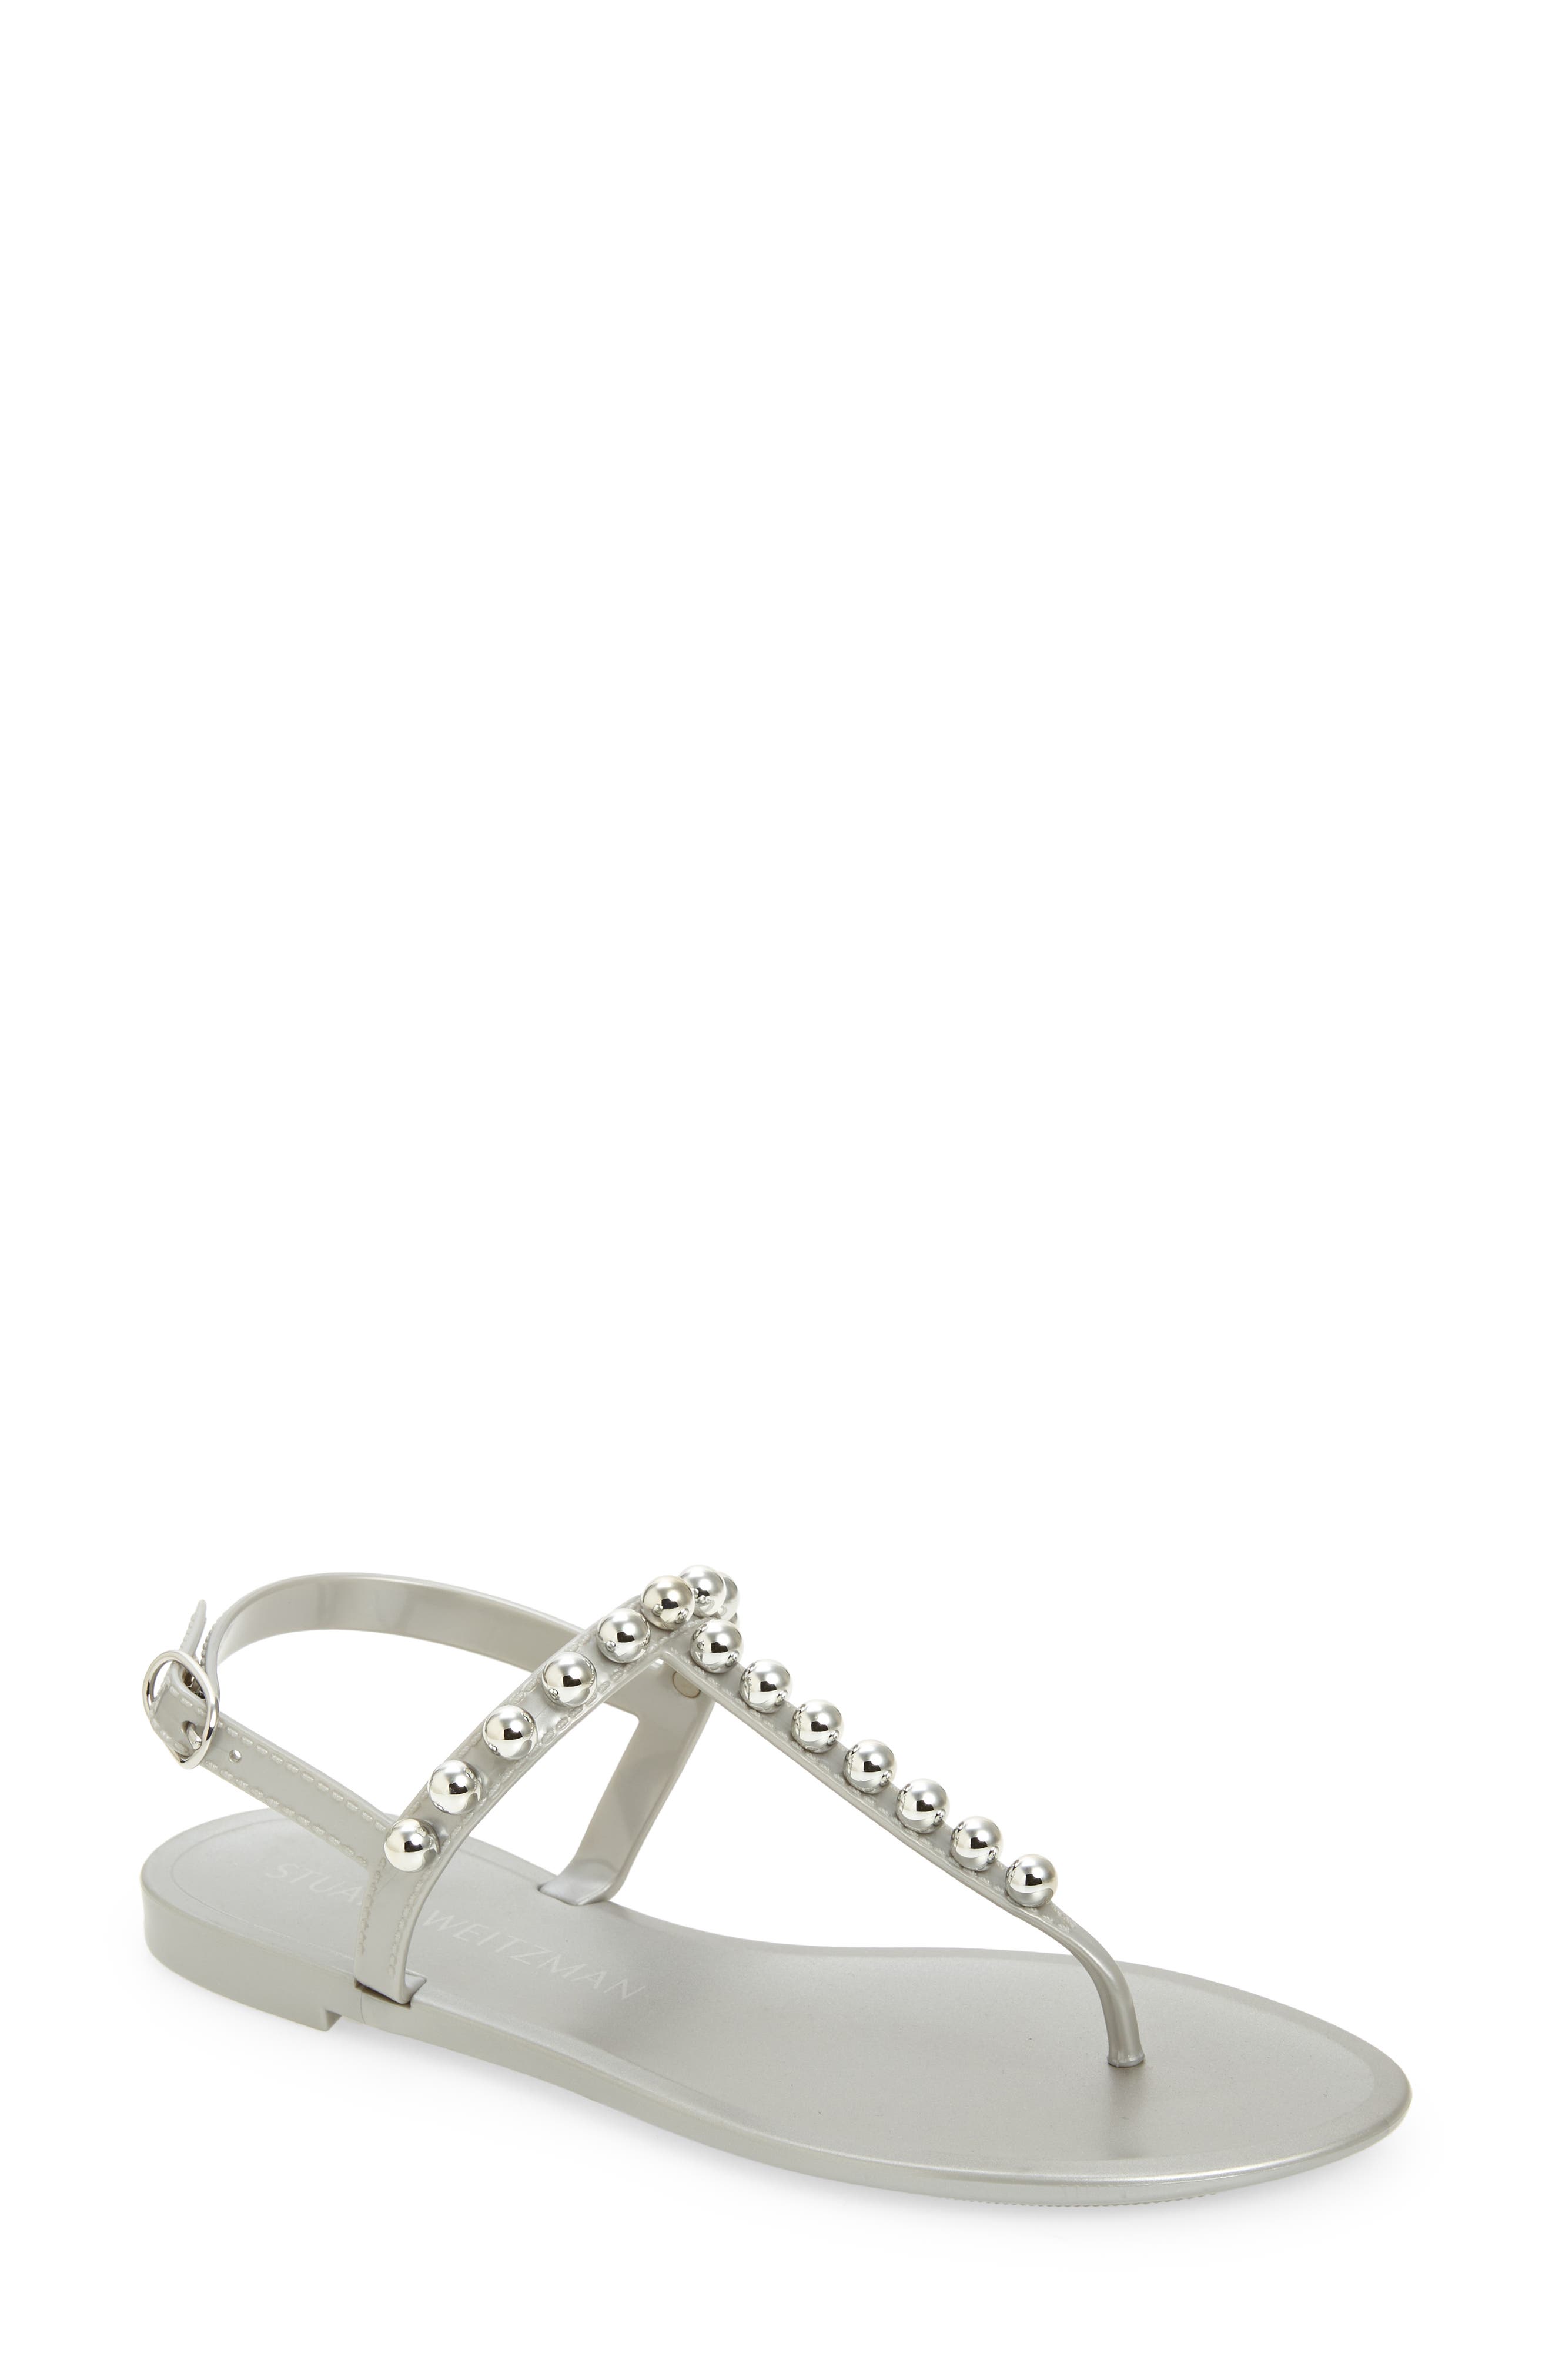 Stuart Weitzman Goldie Jelly Sandal in Silver Tonal at Nordstrom, Size 5